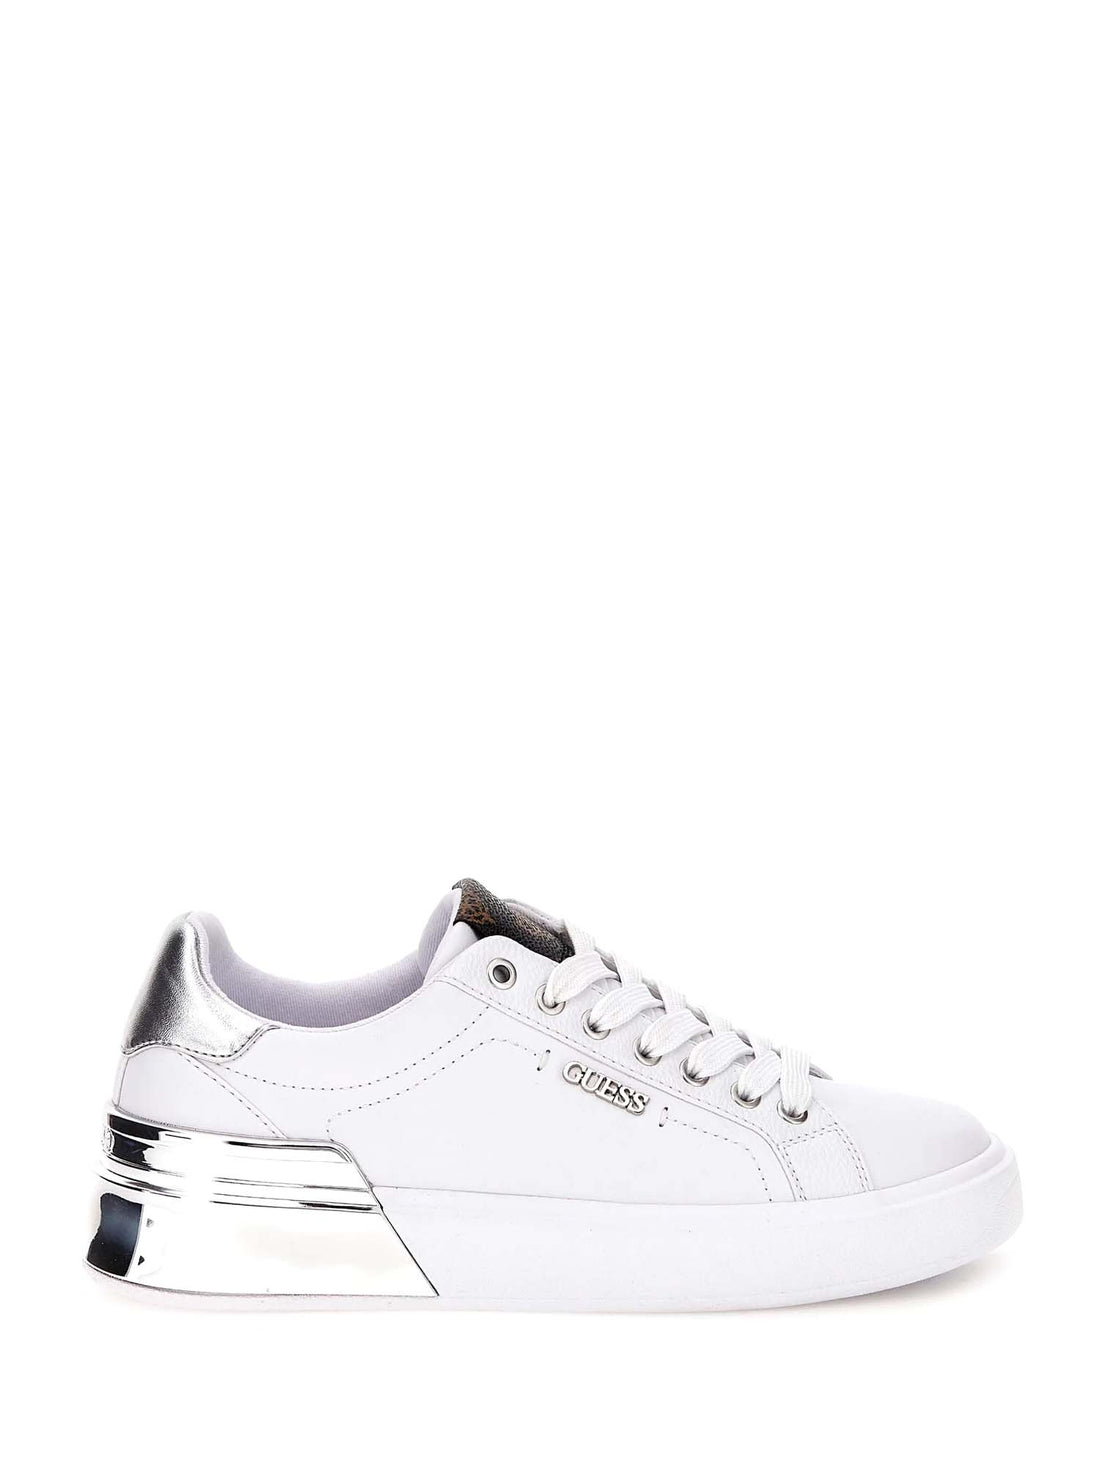 Sneakers Bianco E Argento Guess